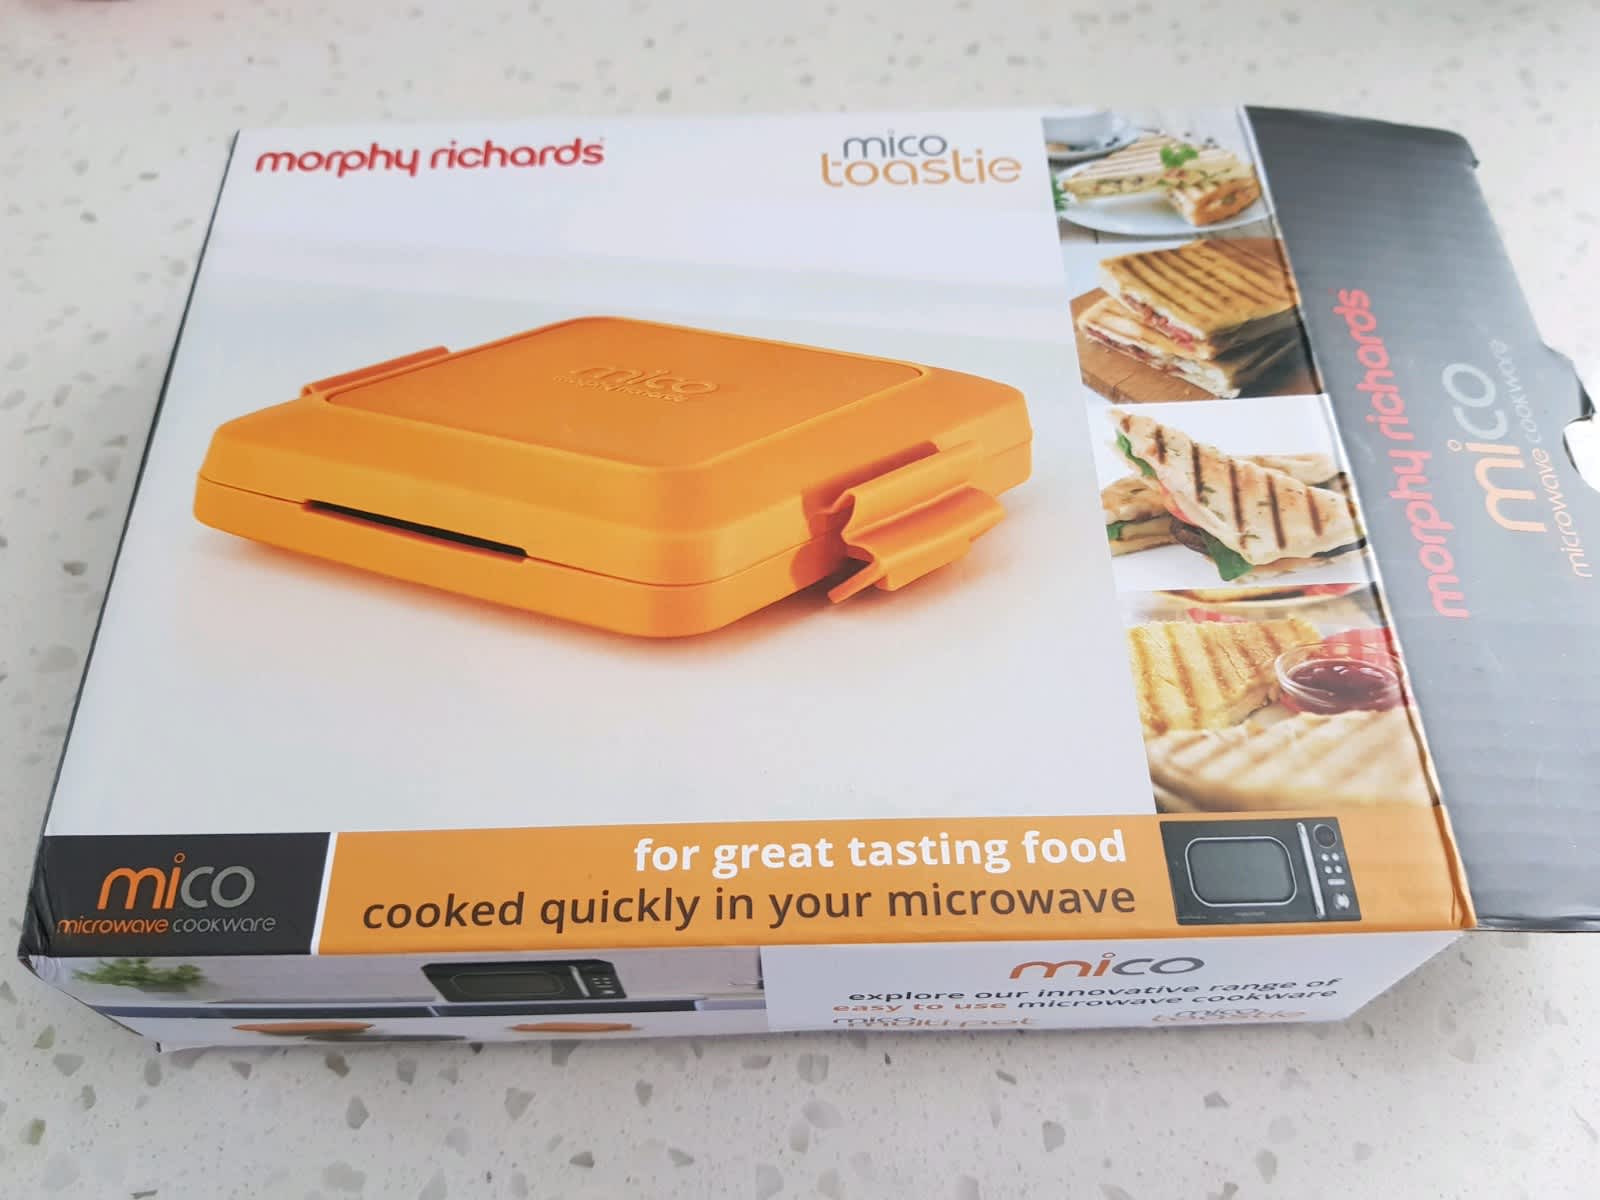 The EASIEST toastie ever!! The Morphy Richards Mico Microwave